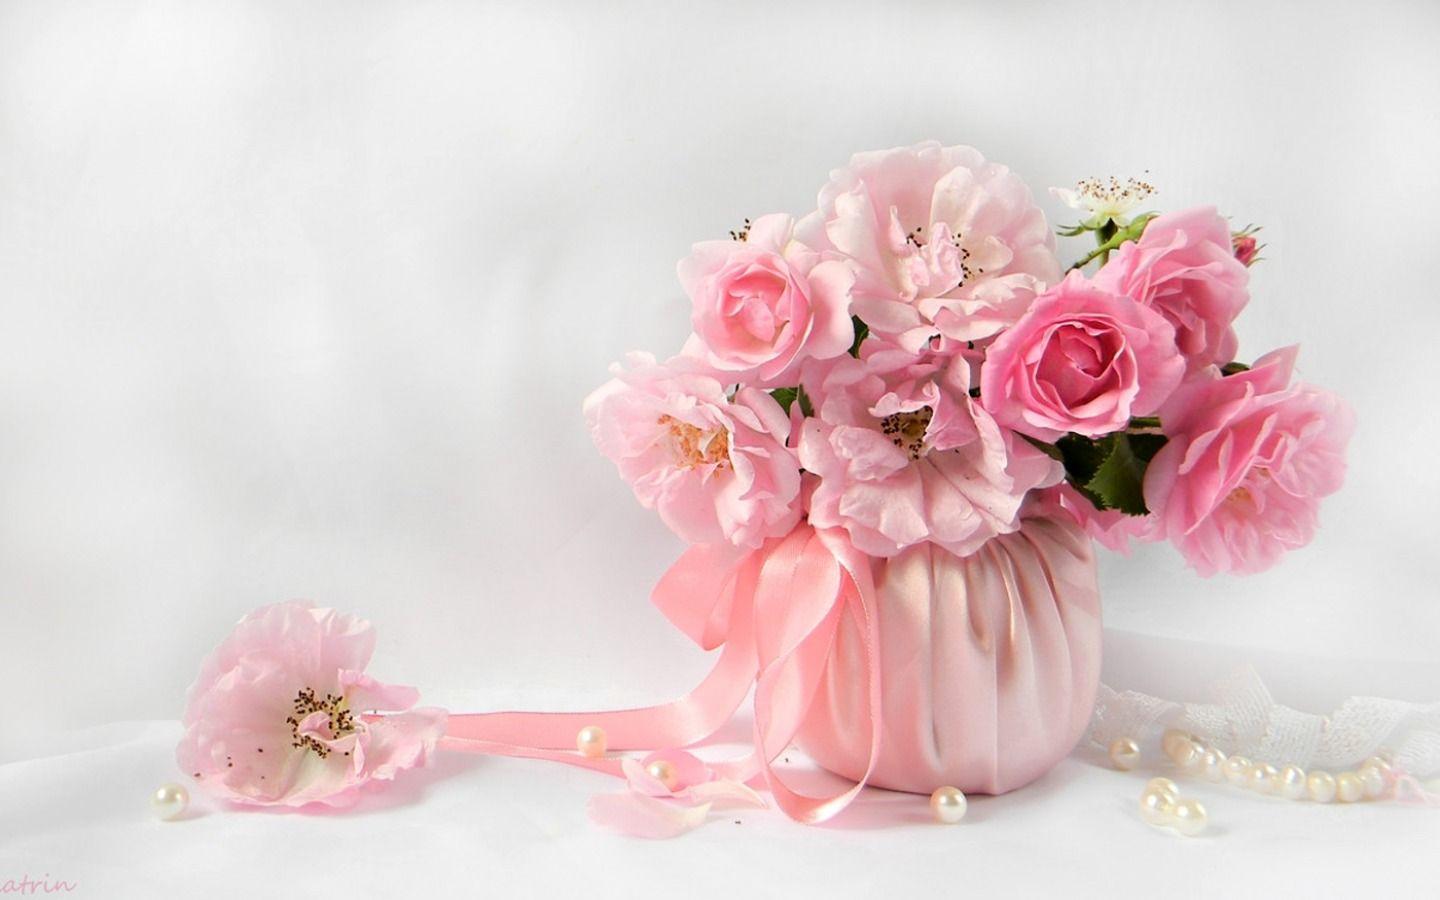 Pink Roses and Peonies Wallpaper and Background Imagex900